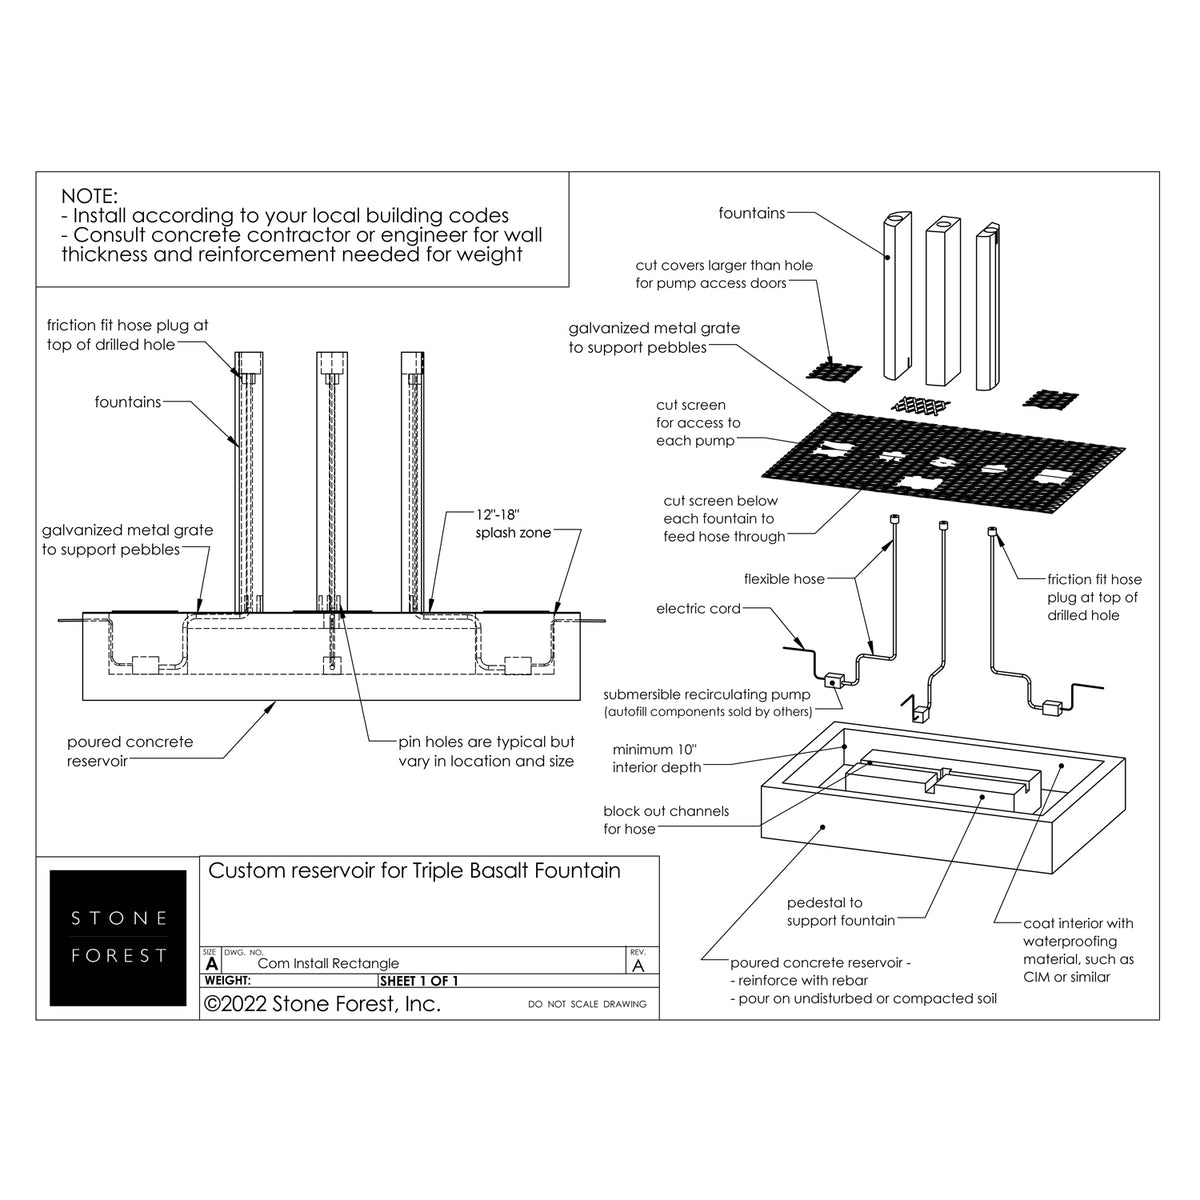 Suggested Custom Installation Diagram for Triple Basalt Fountains image 1 of 1